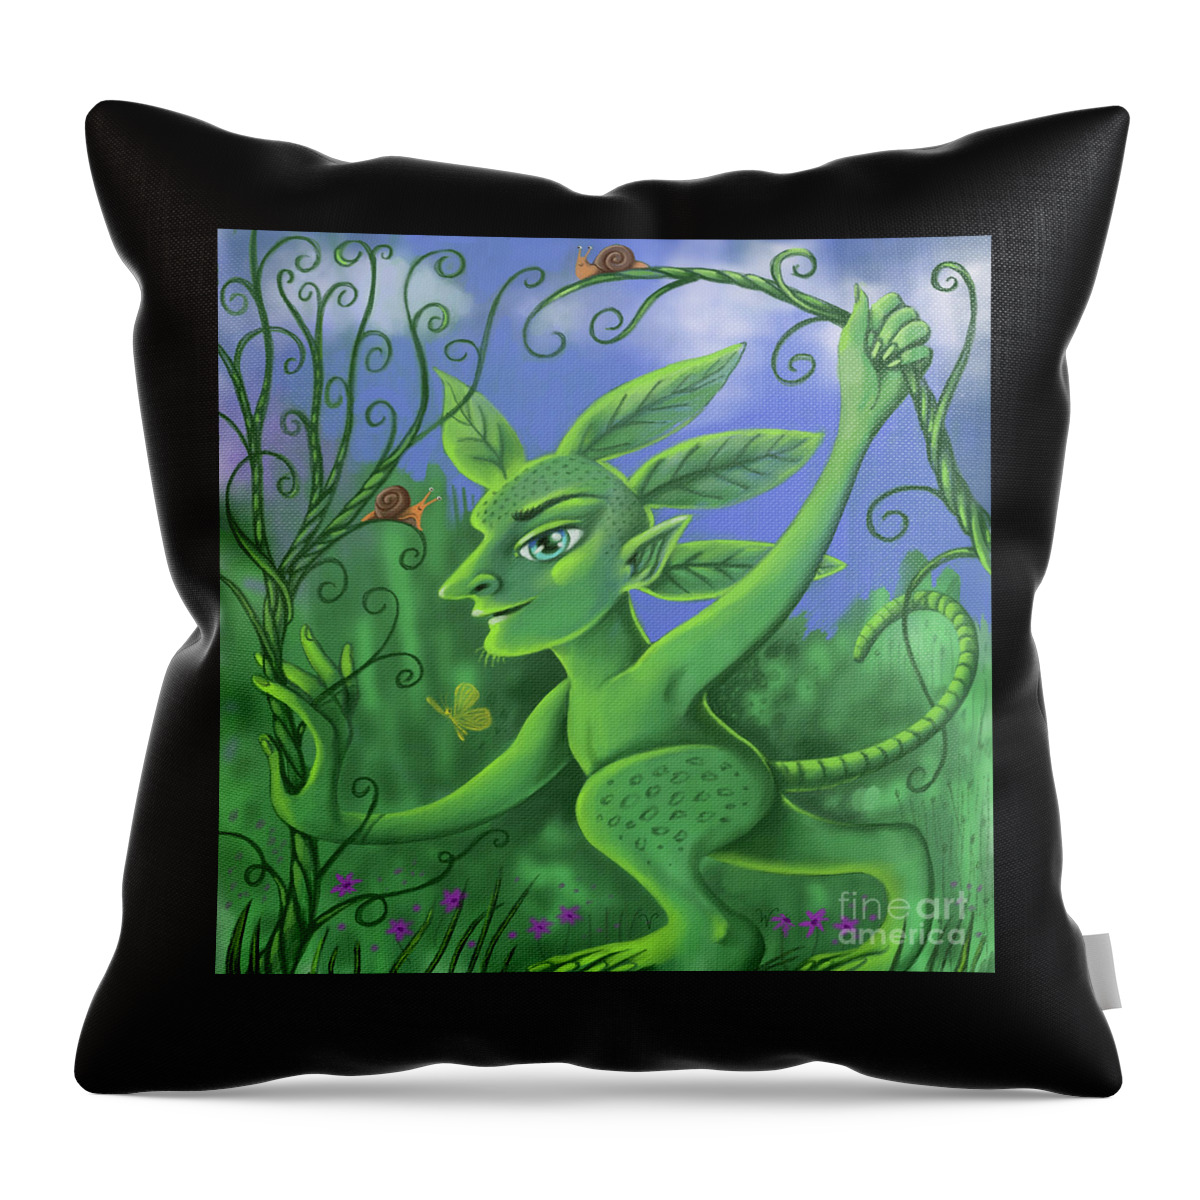 Fantasy Throw Pillow featuring the digital art Leaf Man by Valerie White